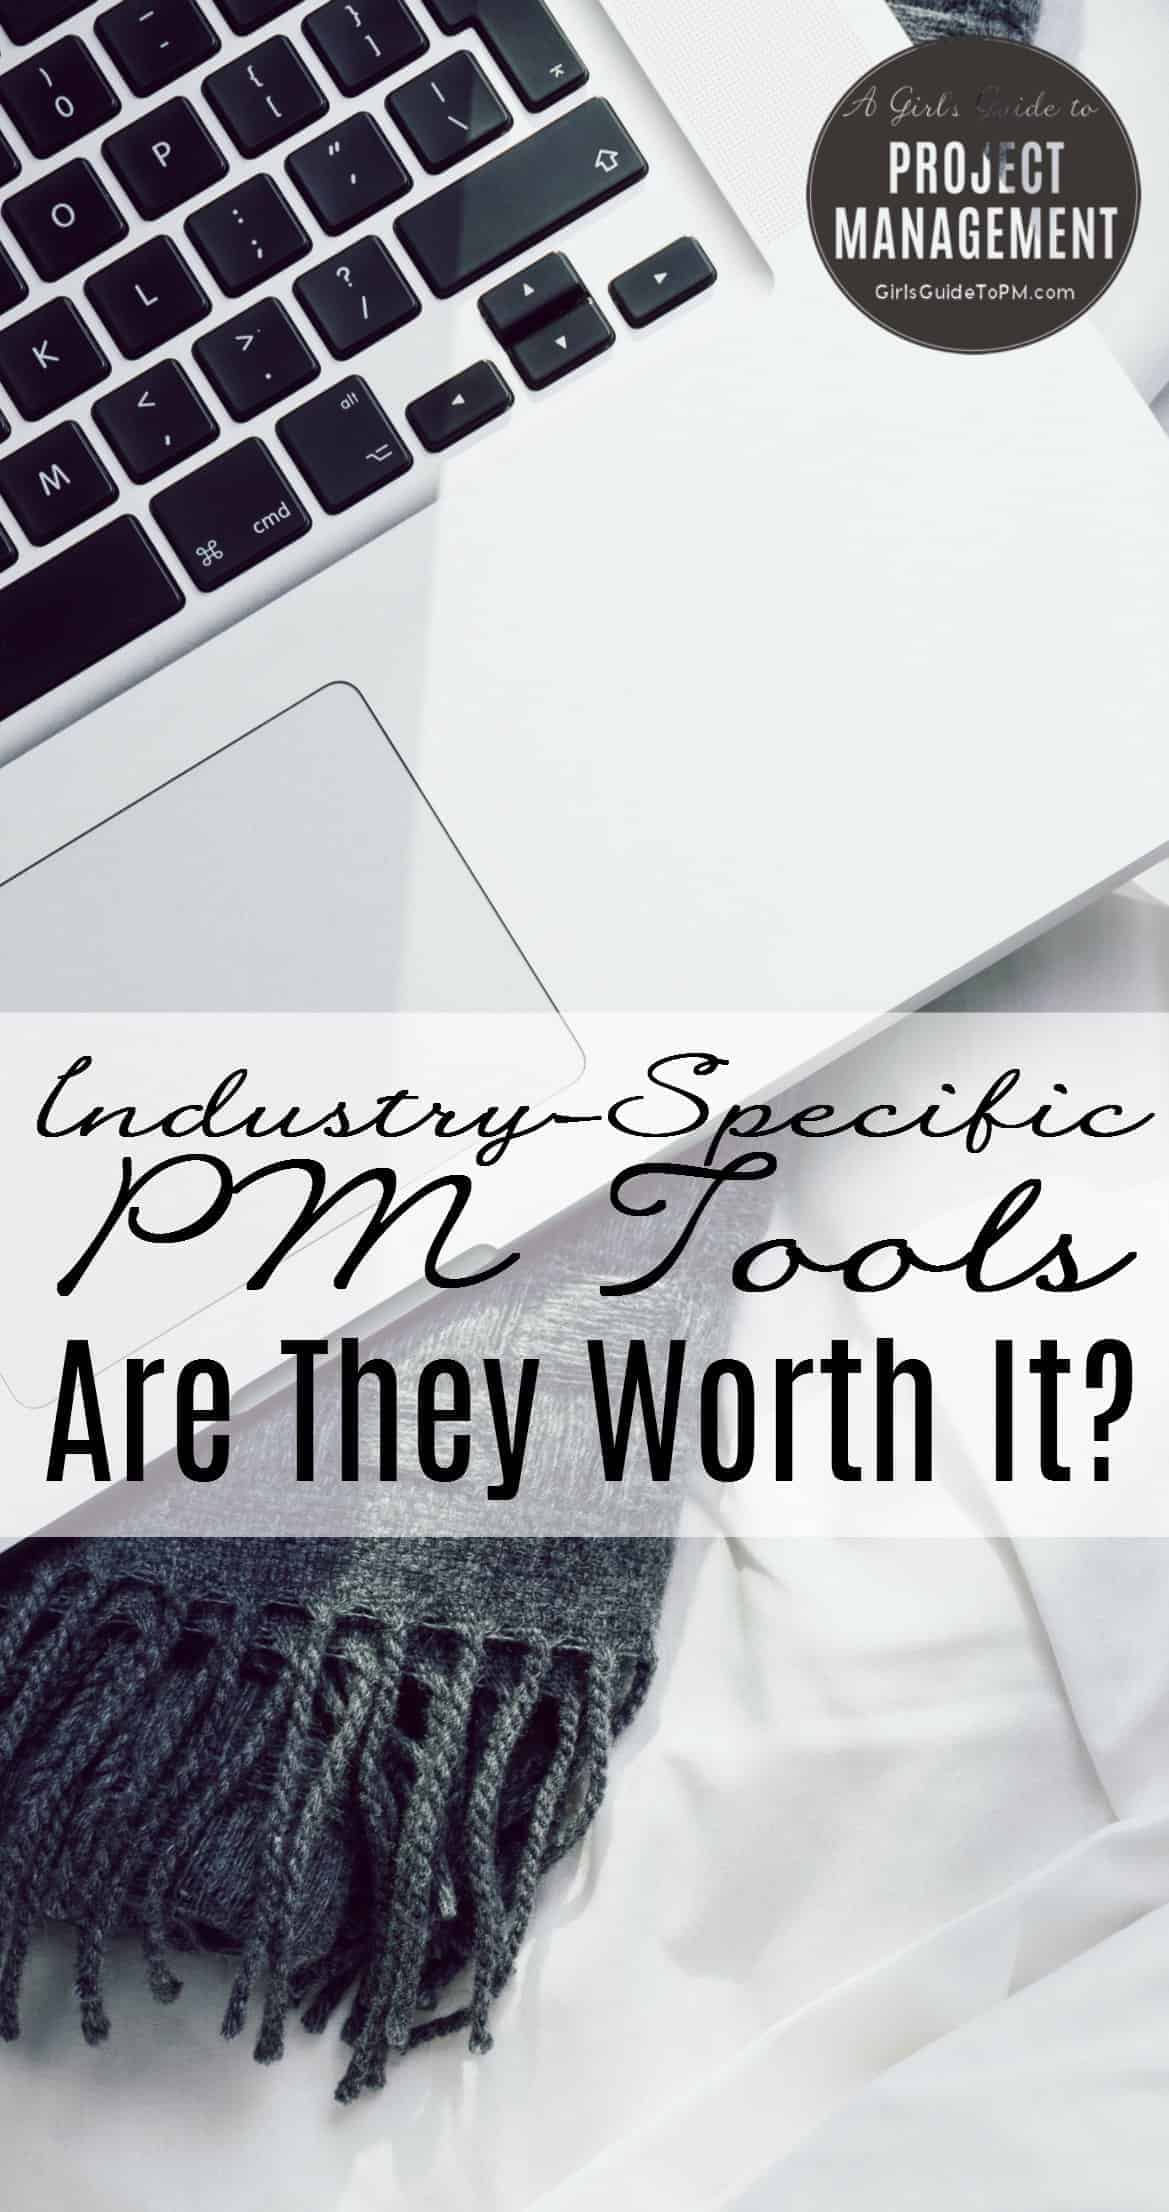 Industry-specific PM tools. Are they worth it?